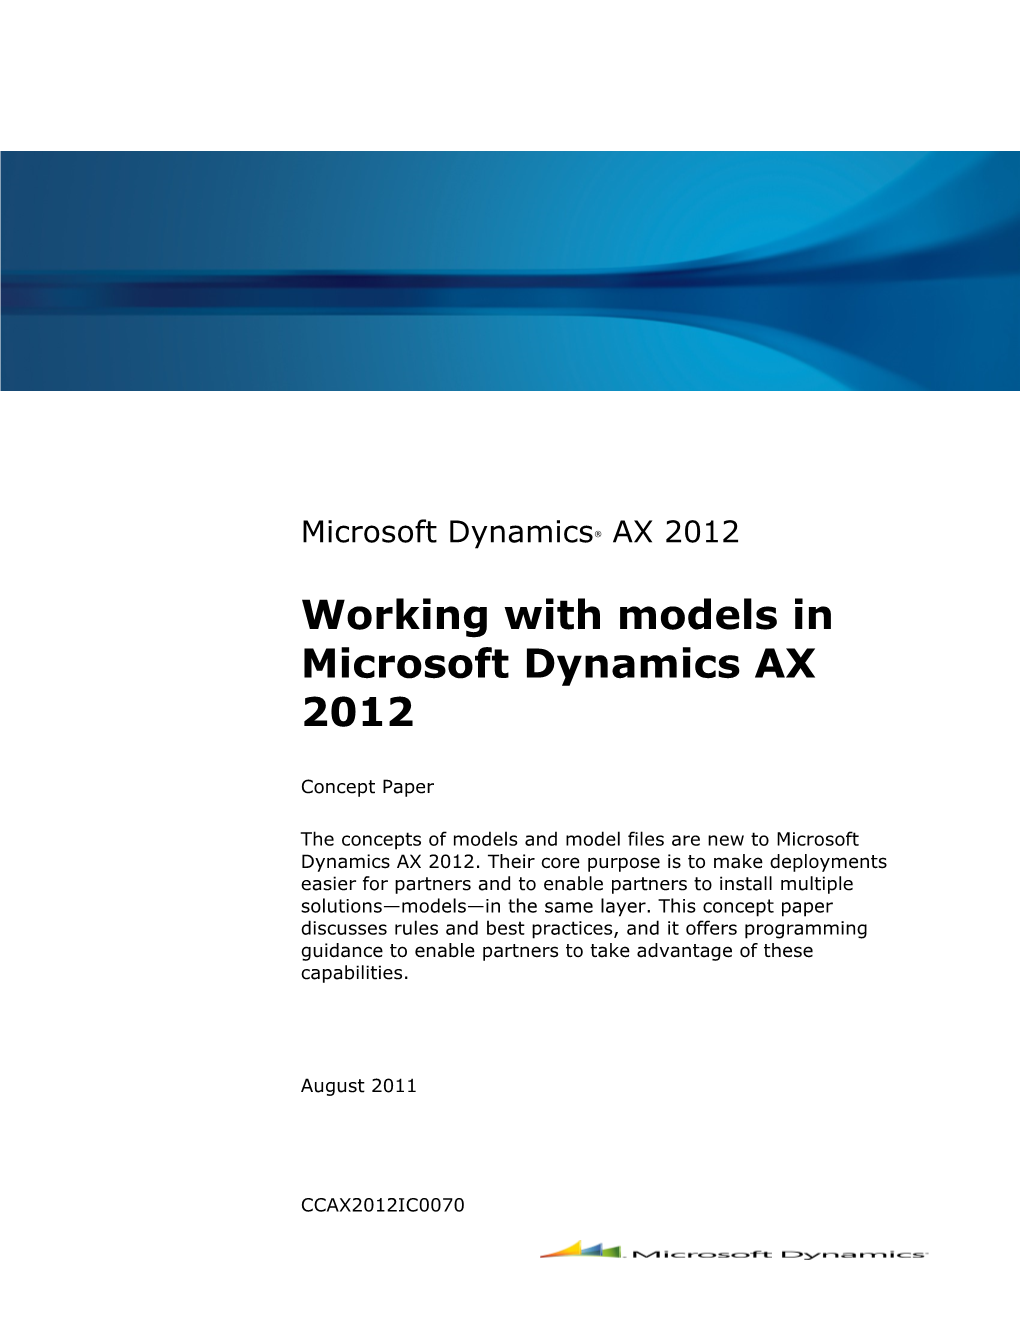 Working with Models in Microsoft Dynamics AX 2012